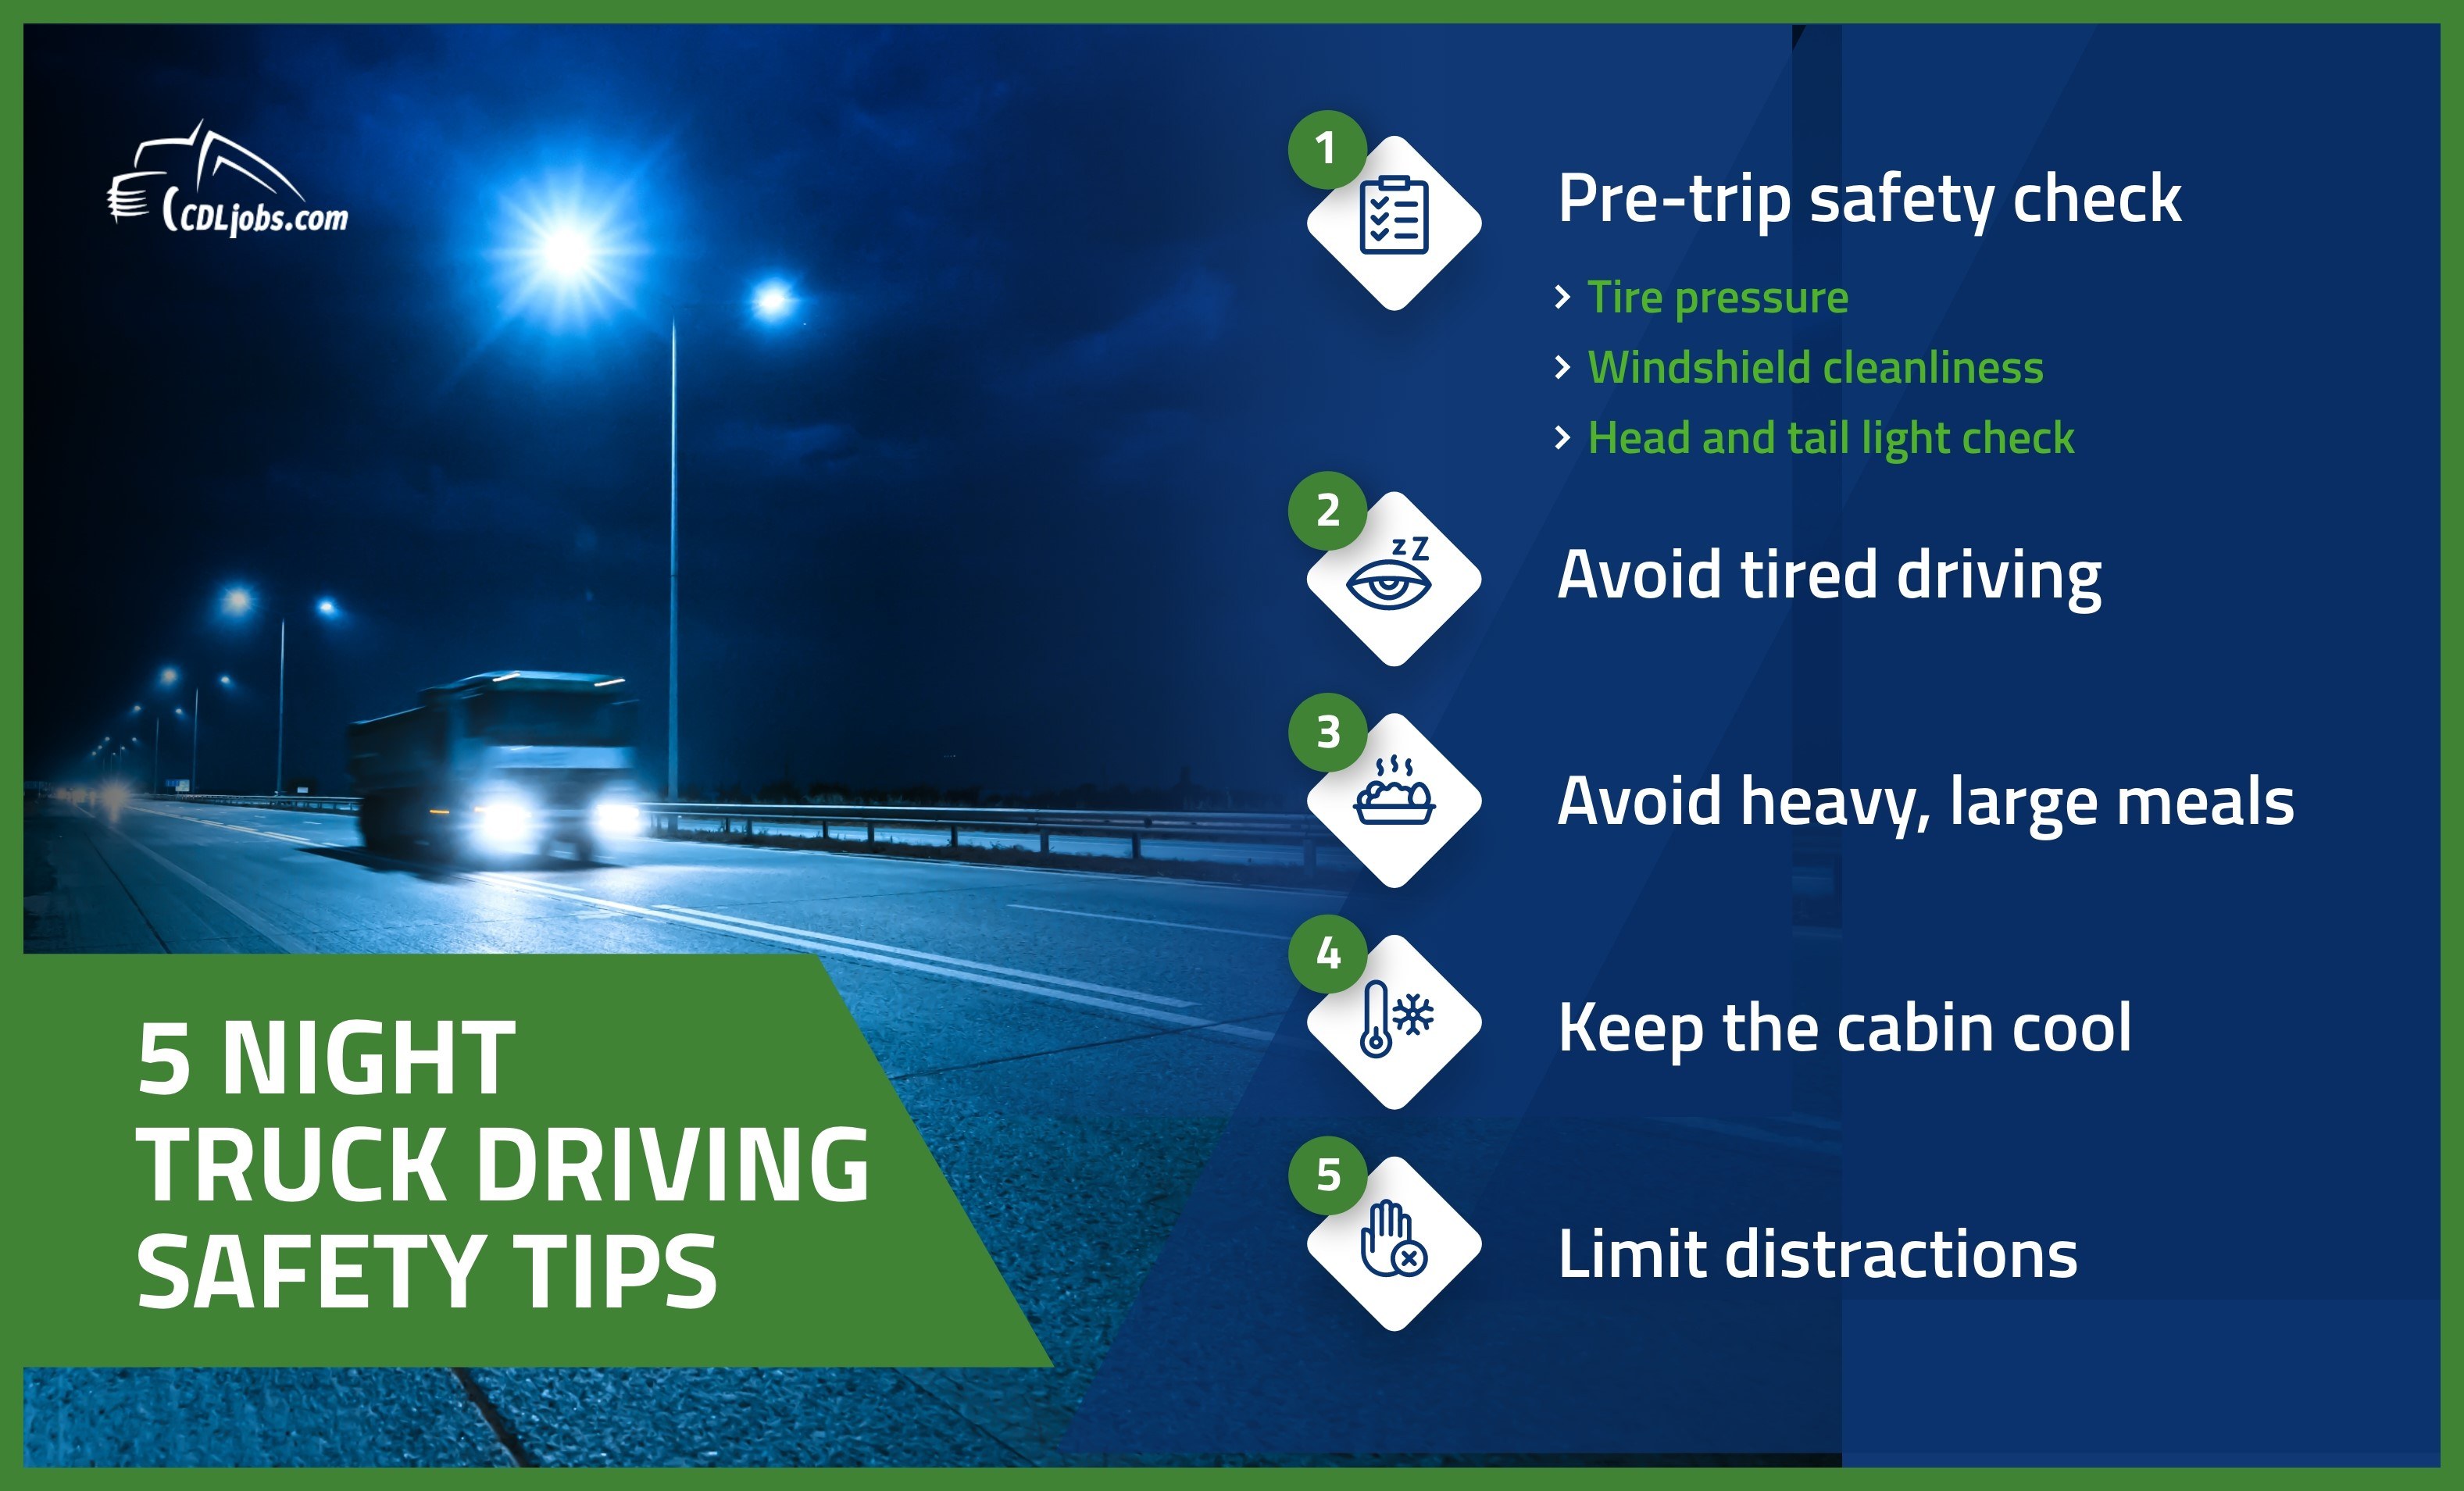 night truck driving safety tips infographic